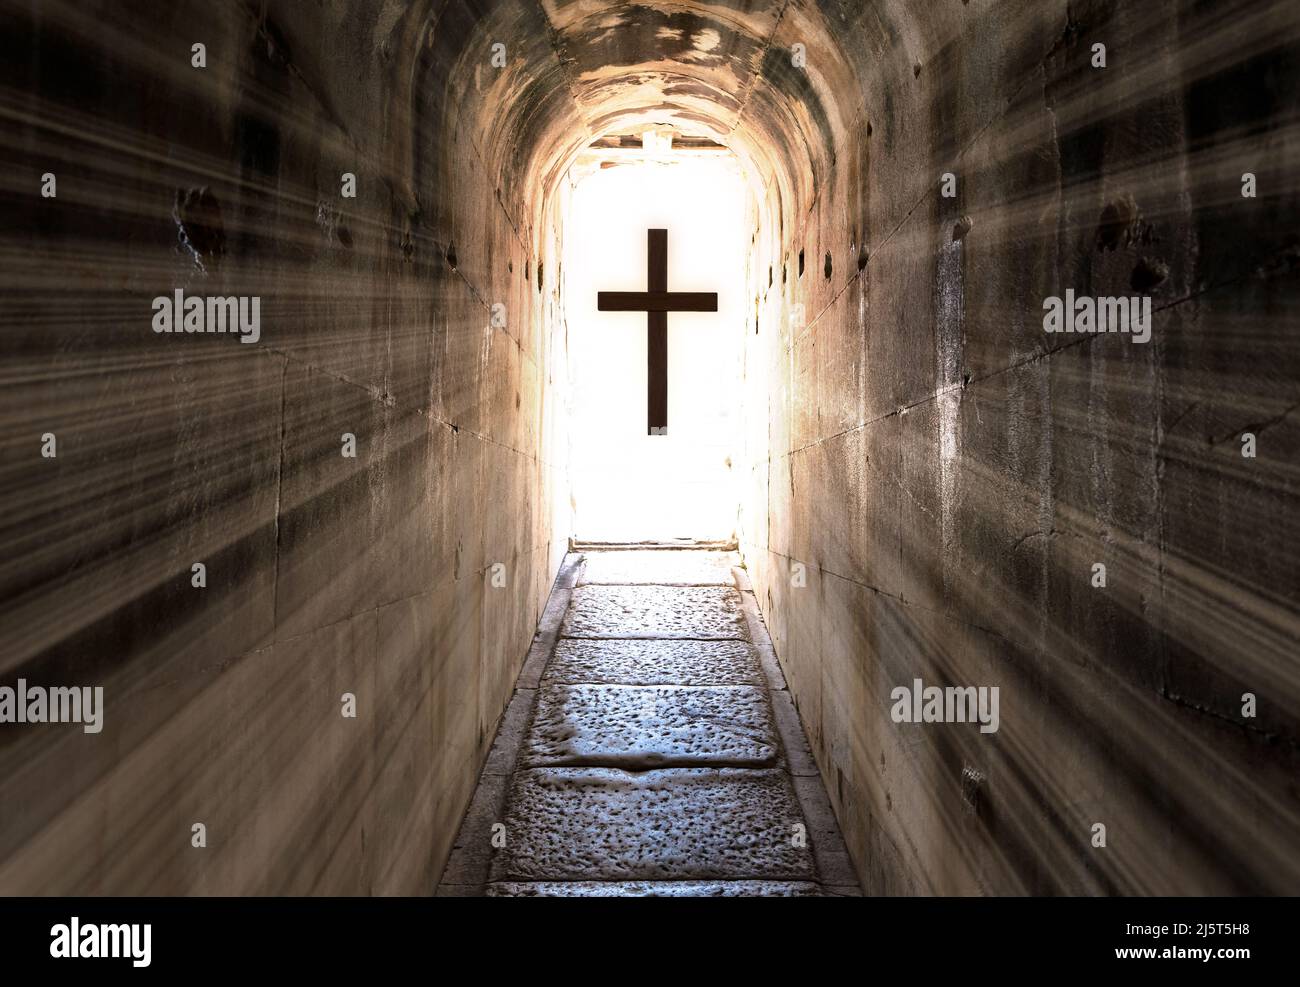 Dark tunnel exit and jesus christ cross with backlight. Concept of heaven after christianity and life after death. Stock Photo